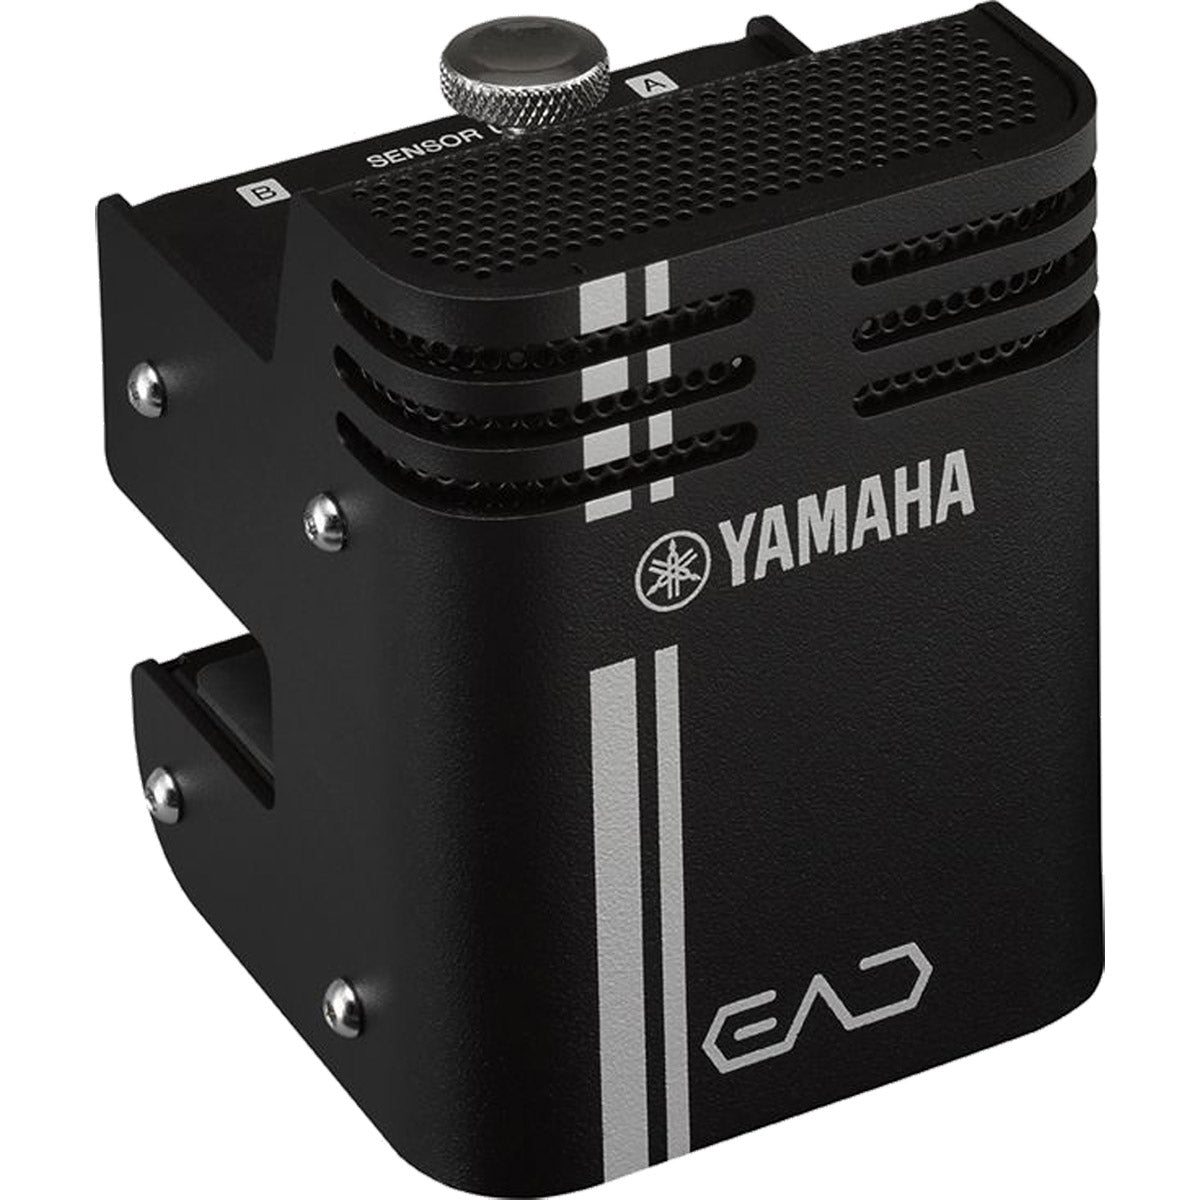 3/4 view of Yamaha EAD10 sensor showing front, top and left side